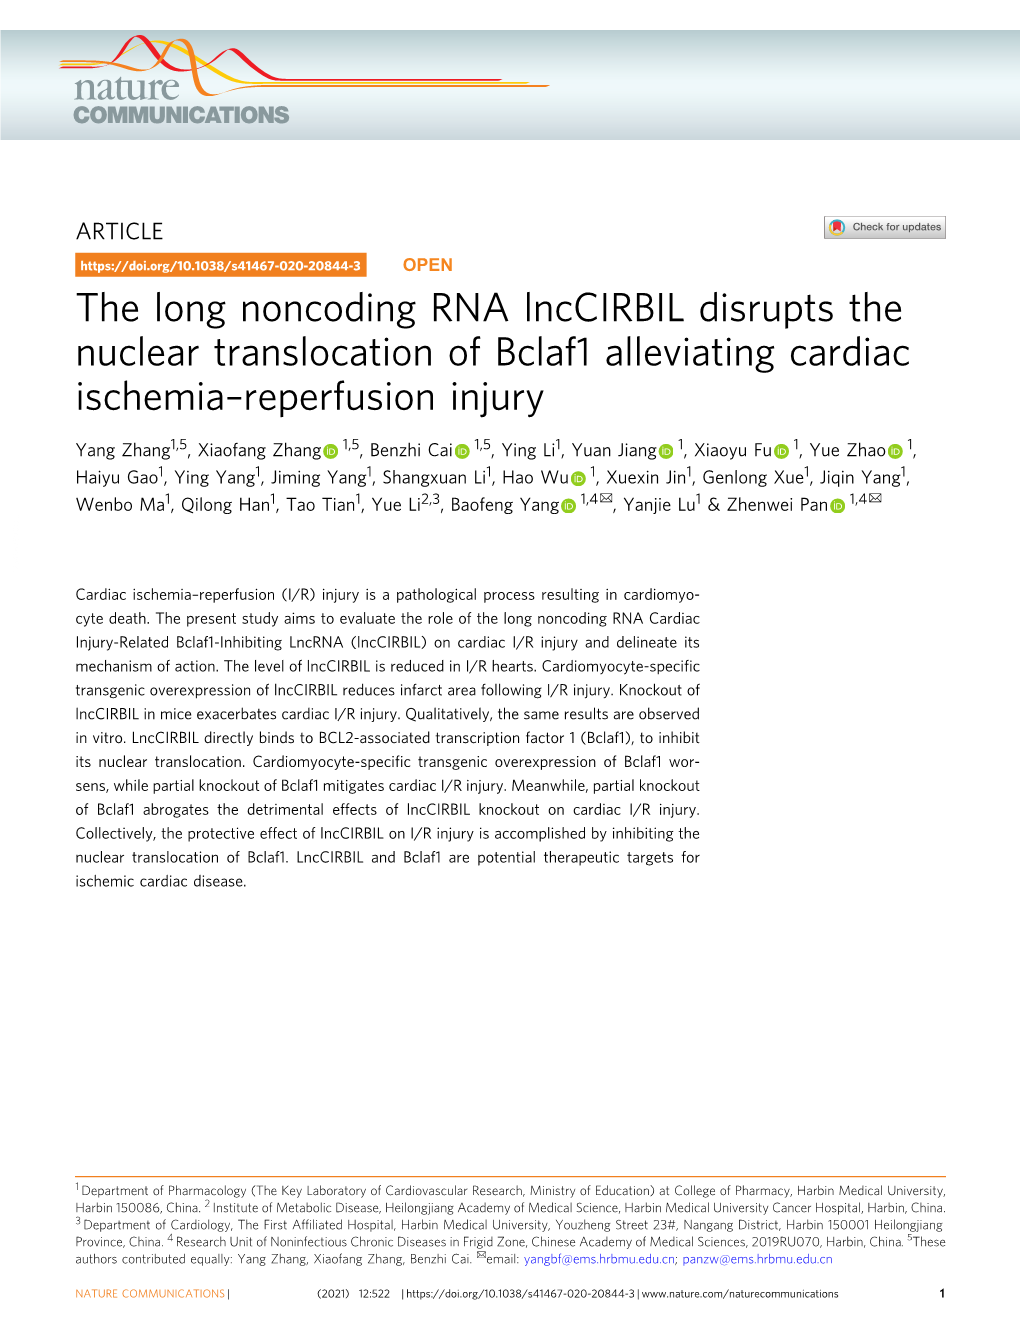 The Long Noncoding RNA Lnccirbil Disrupts the Nuclear Translocation of Bclaf1 Alleviating Cardiac Ischemia–Reperfusion Injury